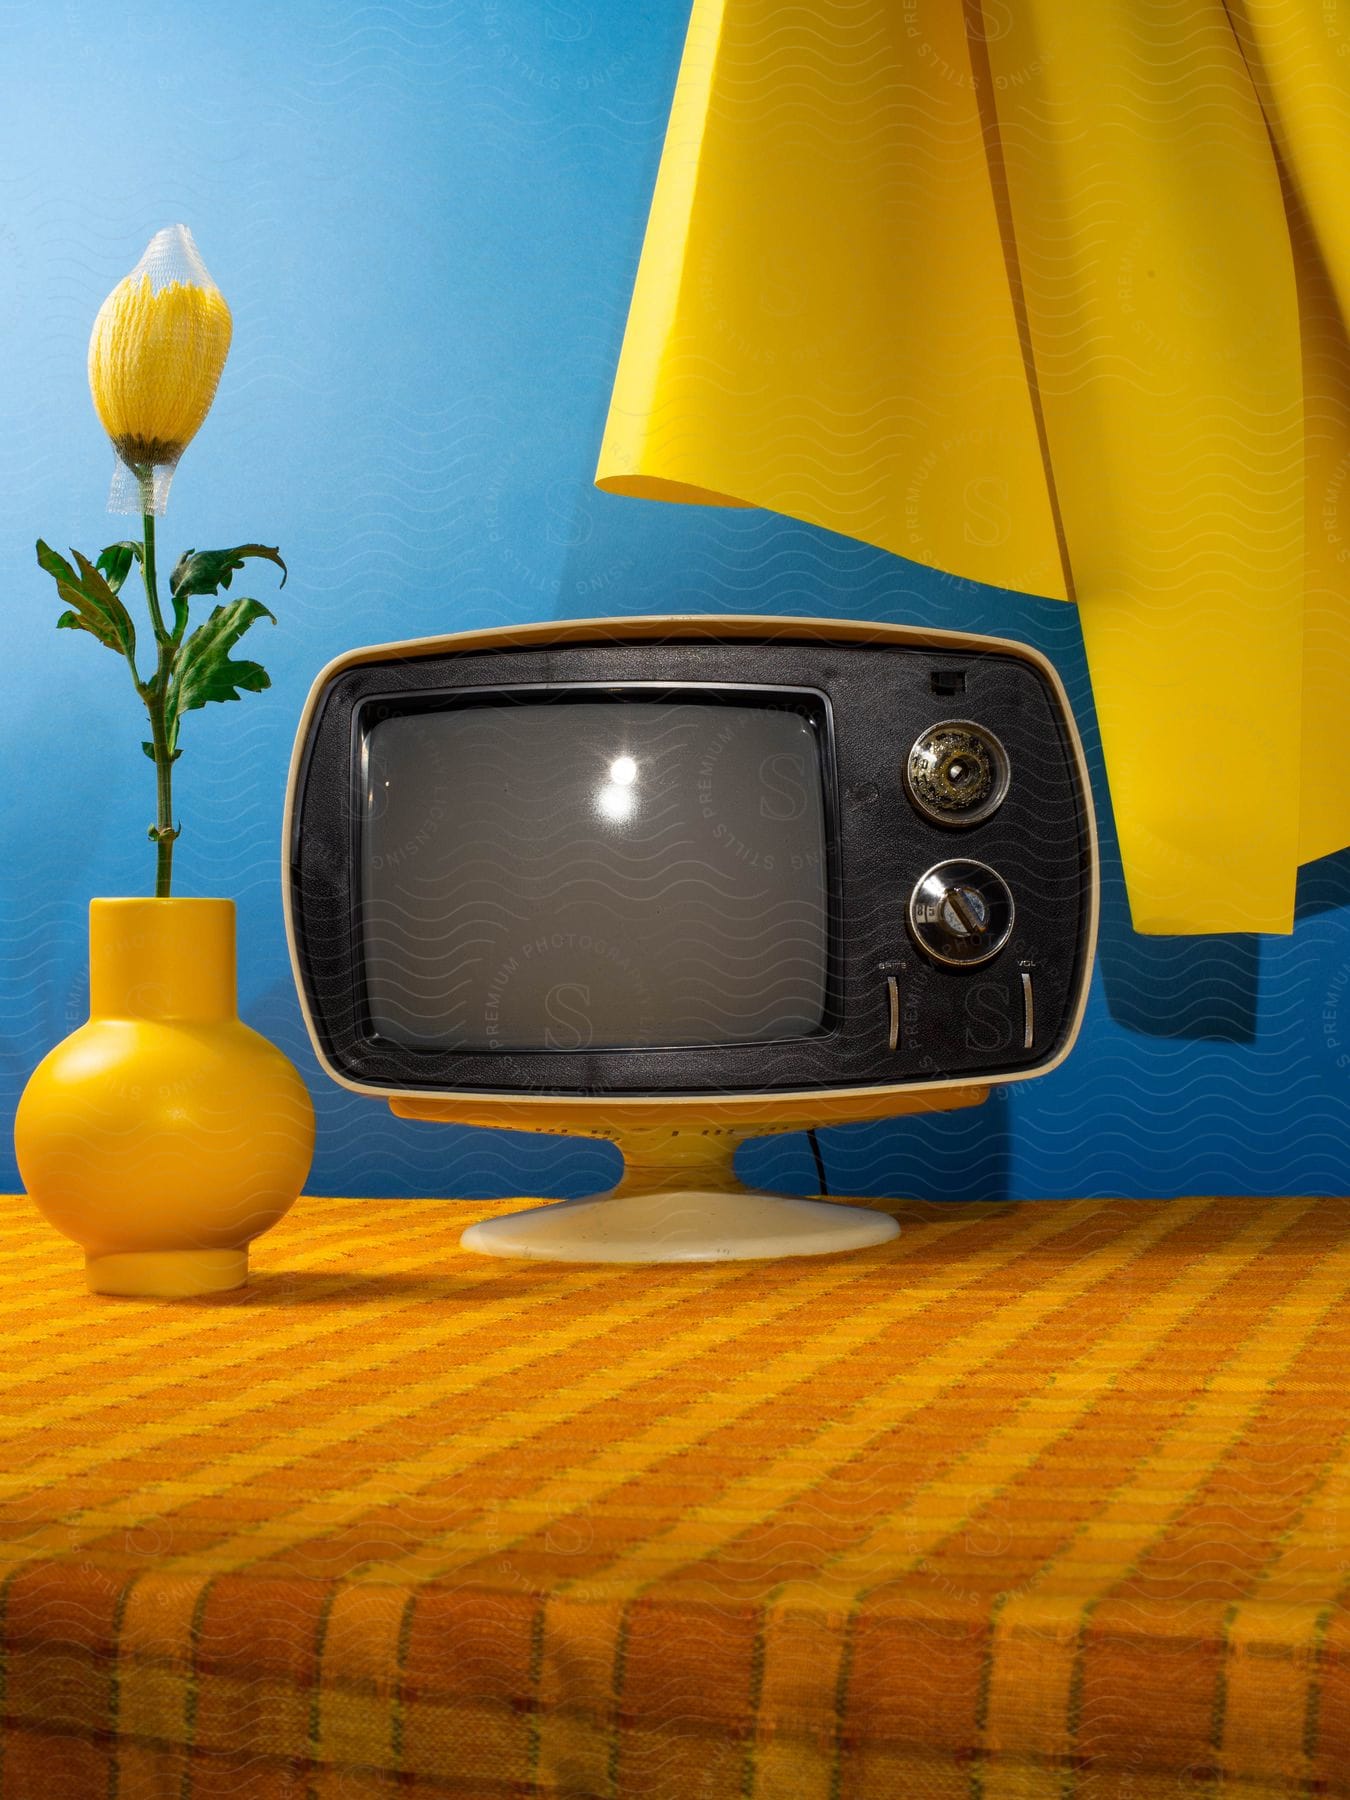 Stock photo of a retro yellow tv sits on a yellow checkered table with a yellow vase and flower, against a blue wall.